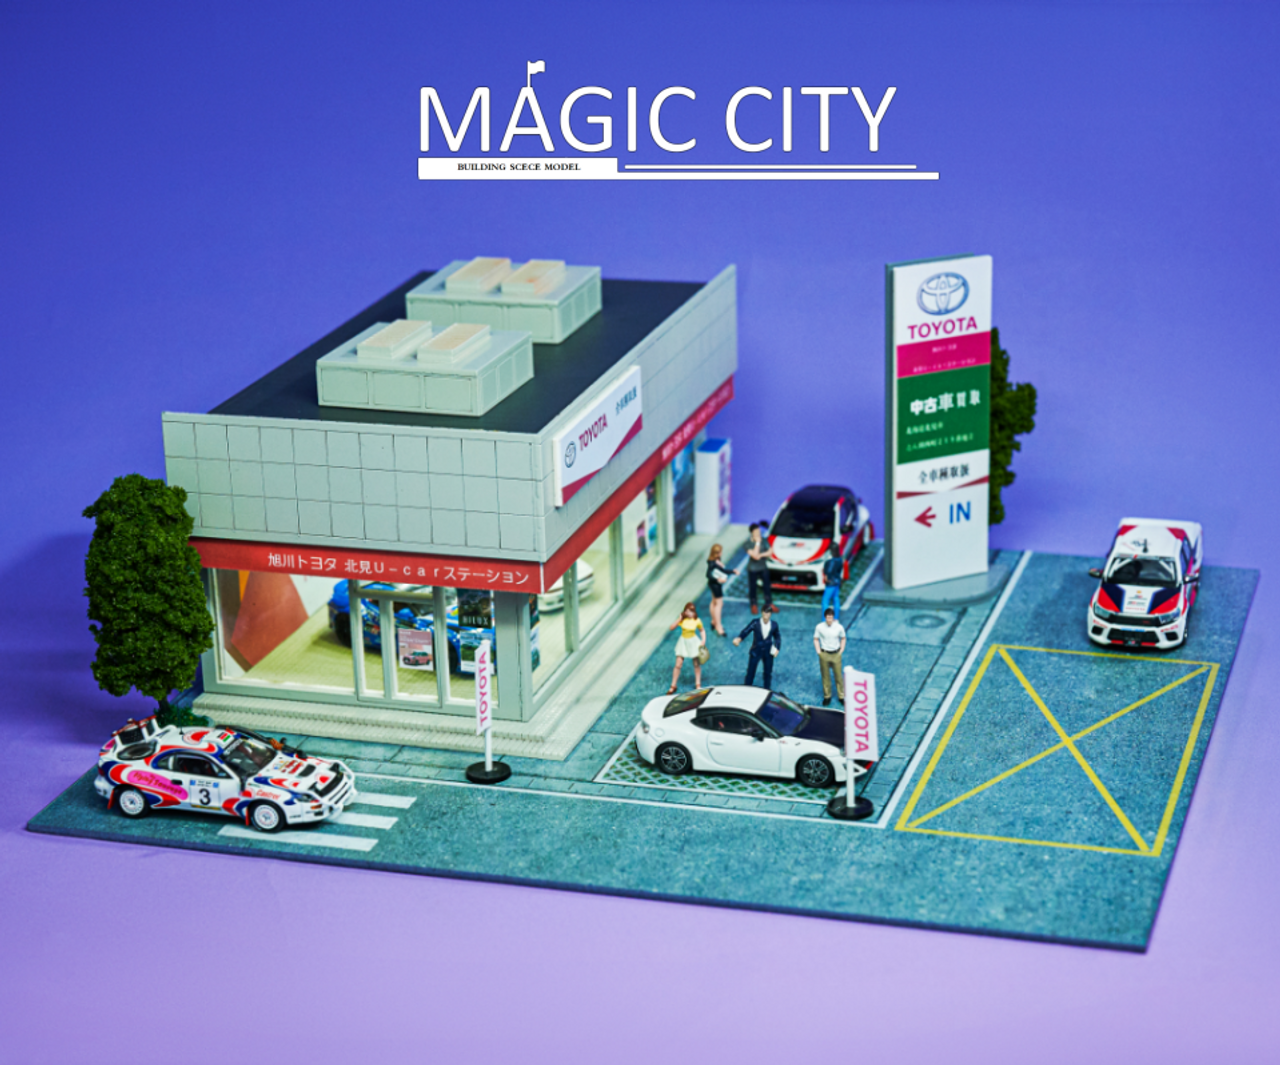 1/64 Magic City Japan Toyota Dealer Showroom Diorama (cars & figures NOT included)